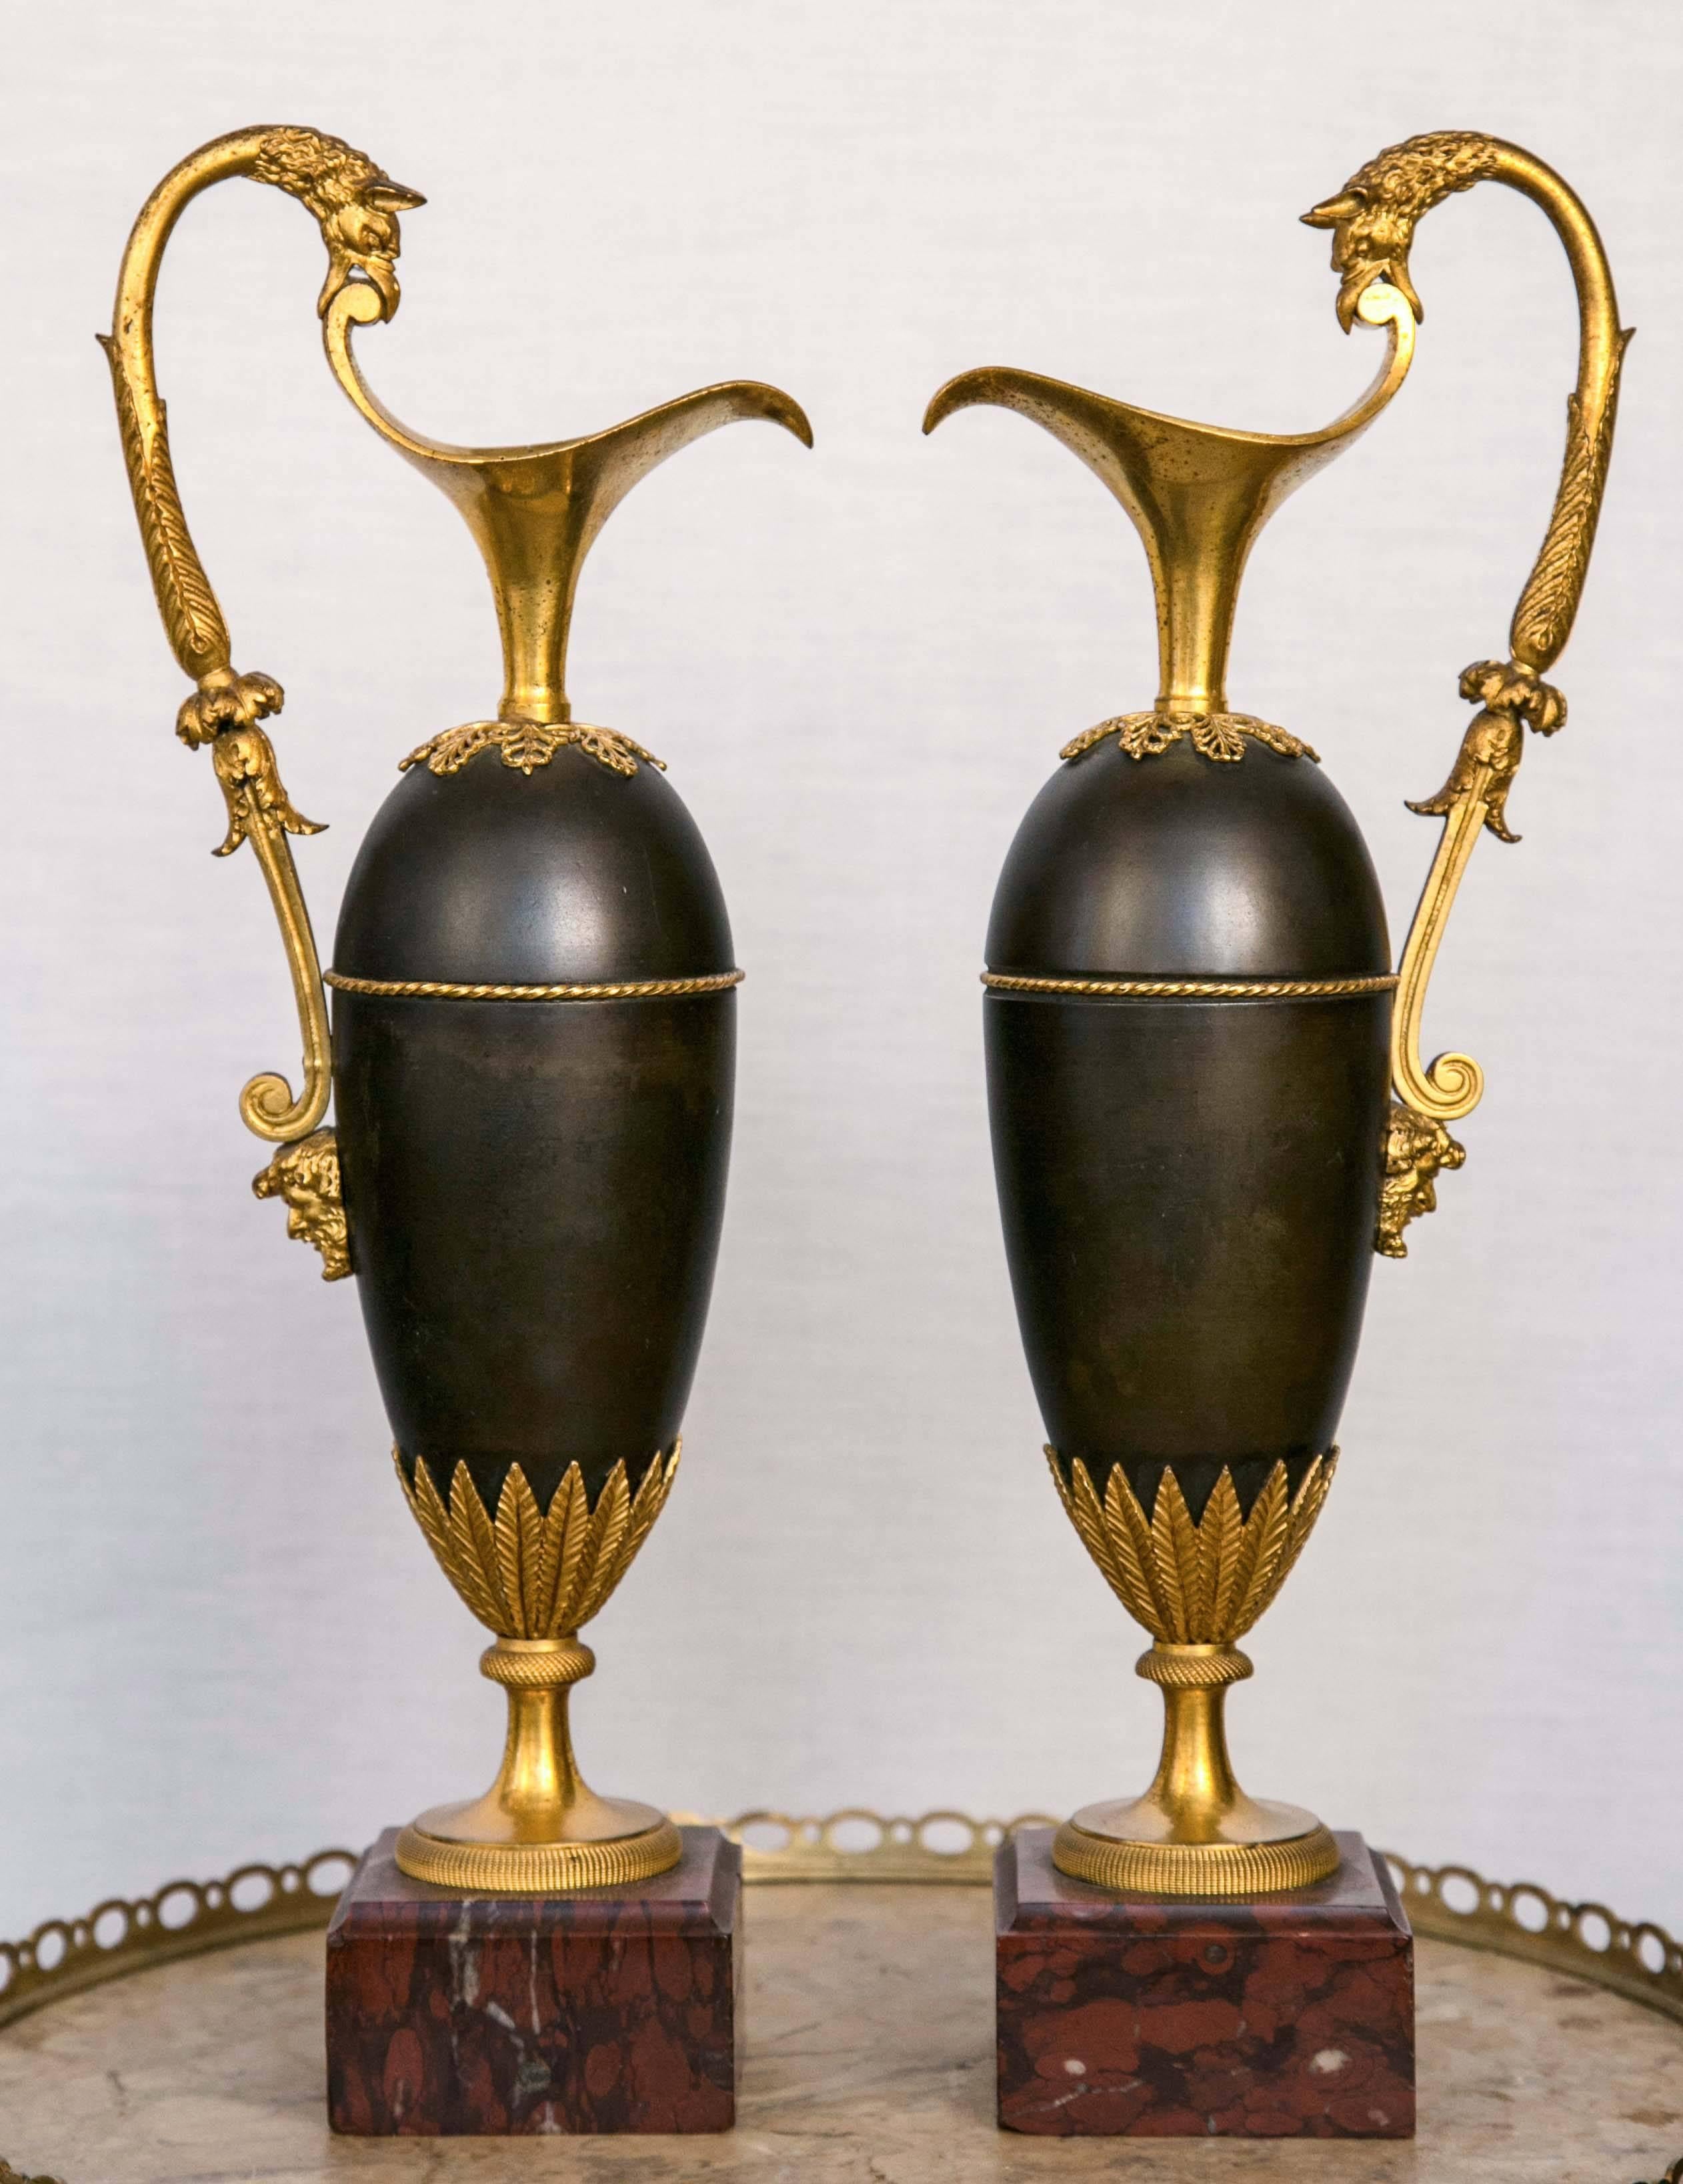 A superb pair of bronze ewers from the French Empire period with gilt bronze swooping high handles ending in horned bird heads attached to the spouts, below which are bearded male masks. Open work palmettes below the spouts, a ring of tightly